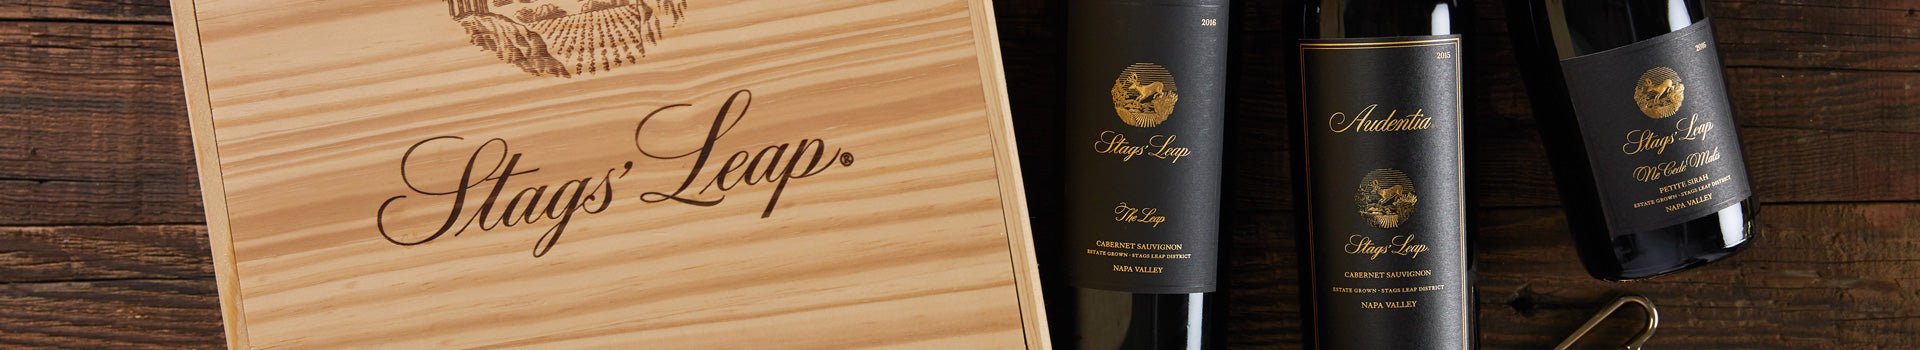 Stags' Leap Winery - Vyno